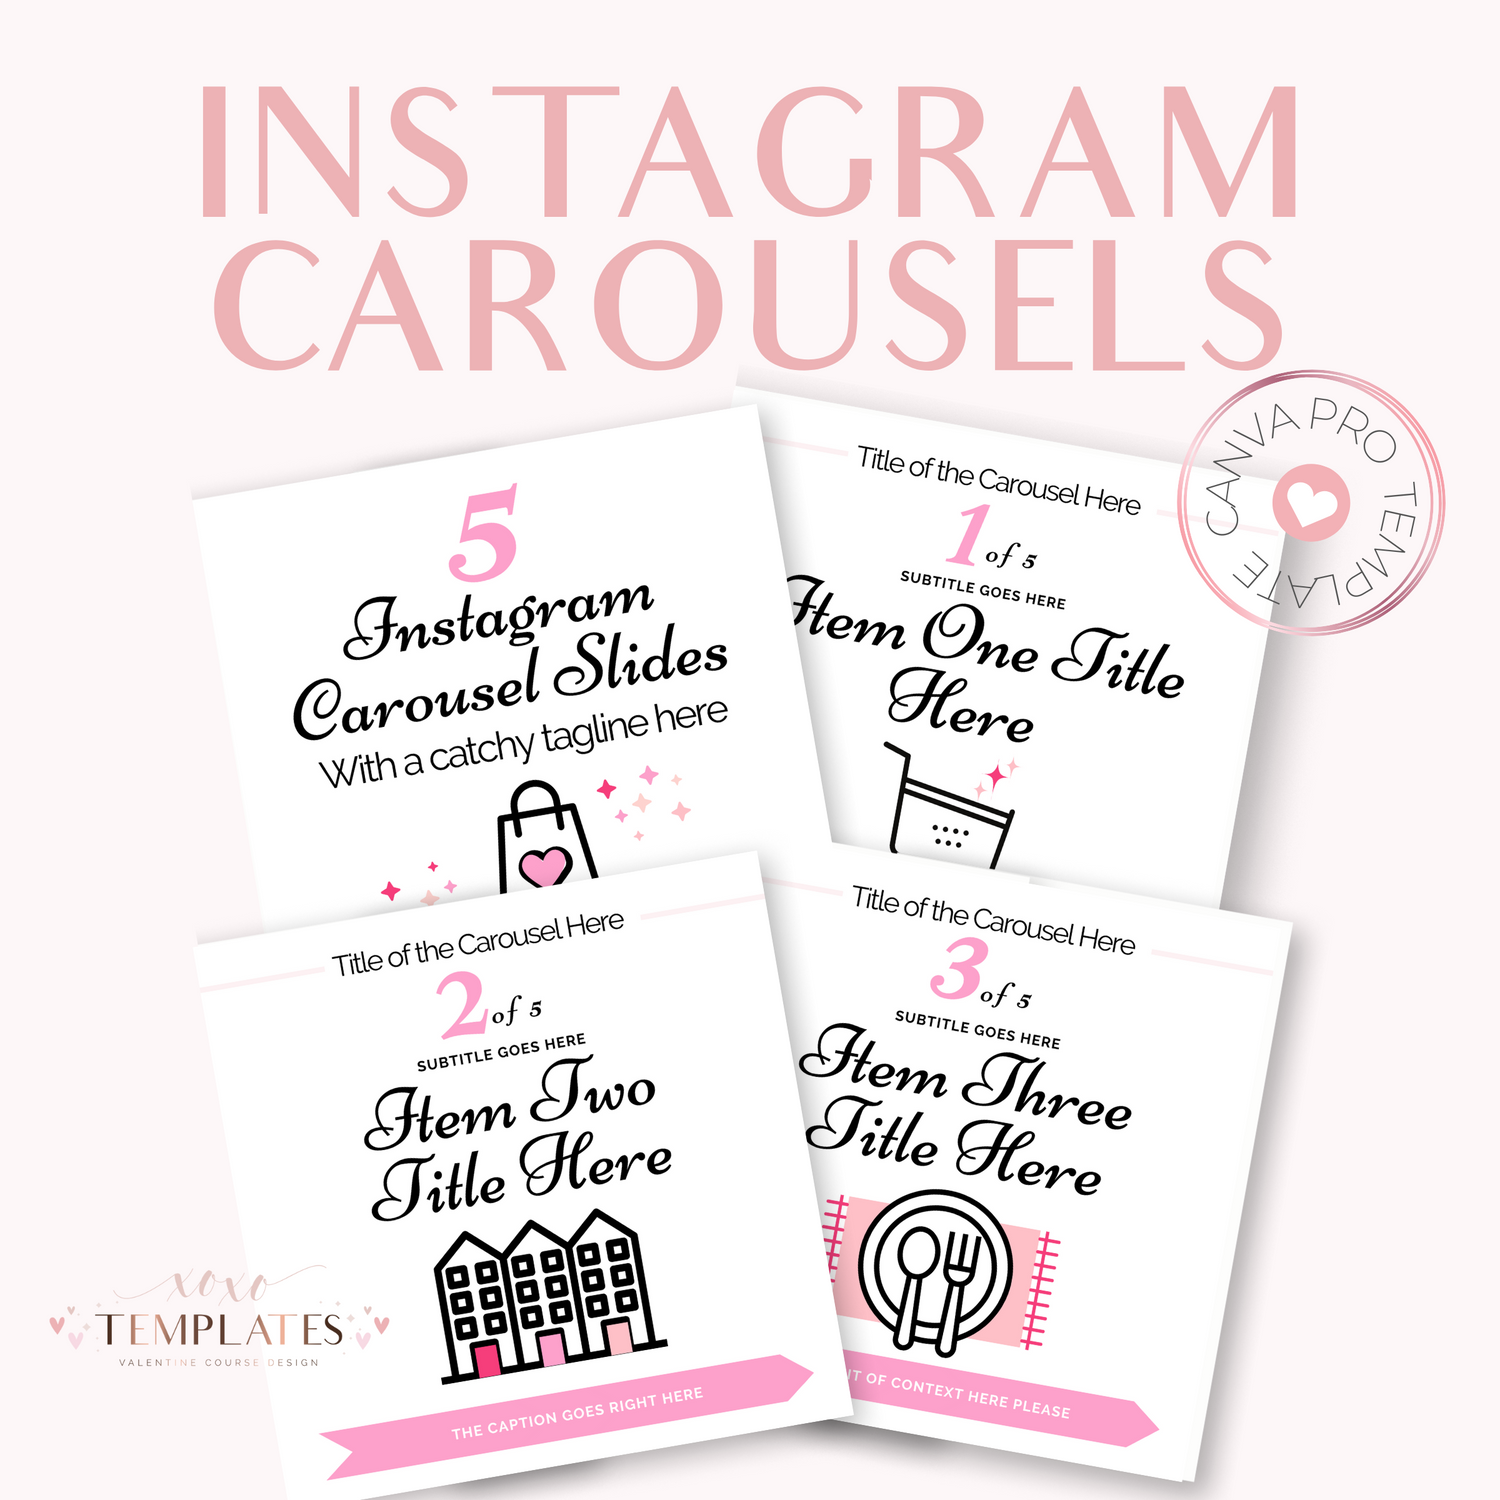 IG Carousels set of 3